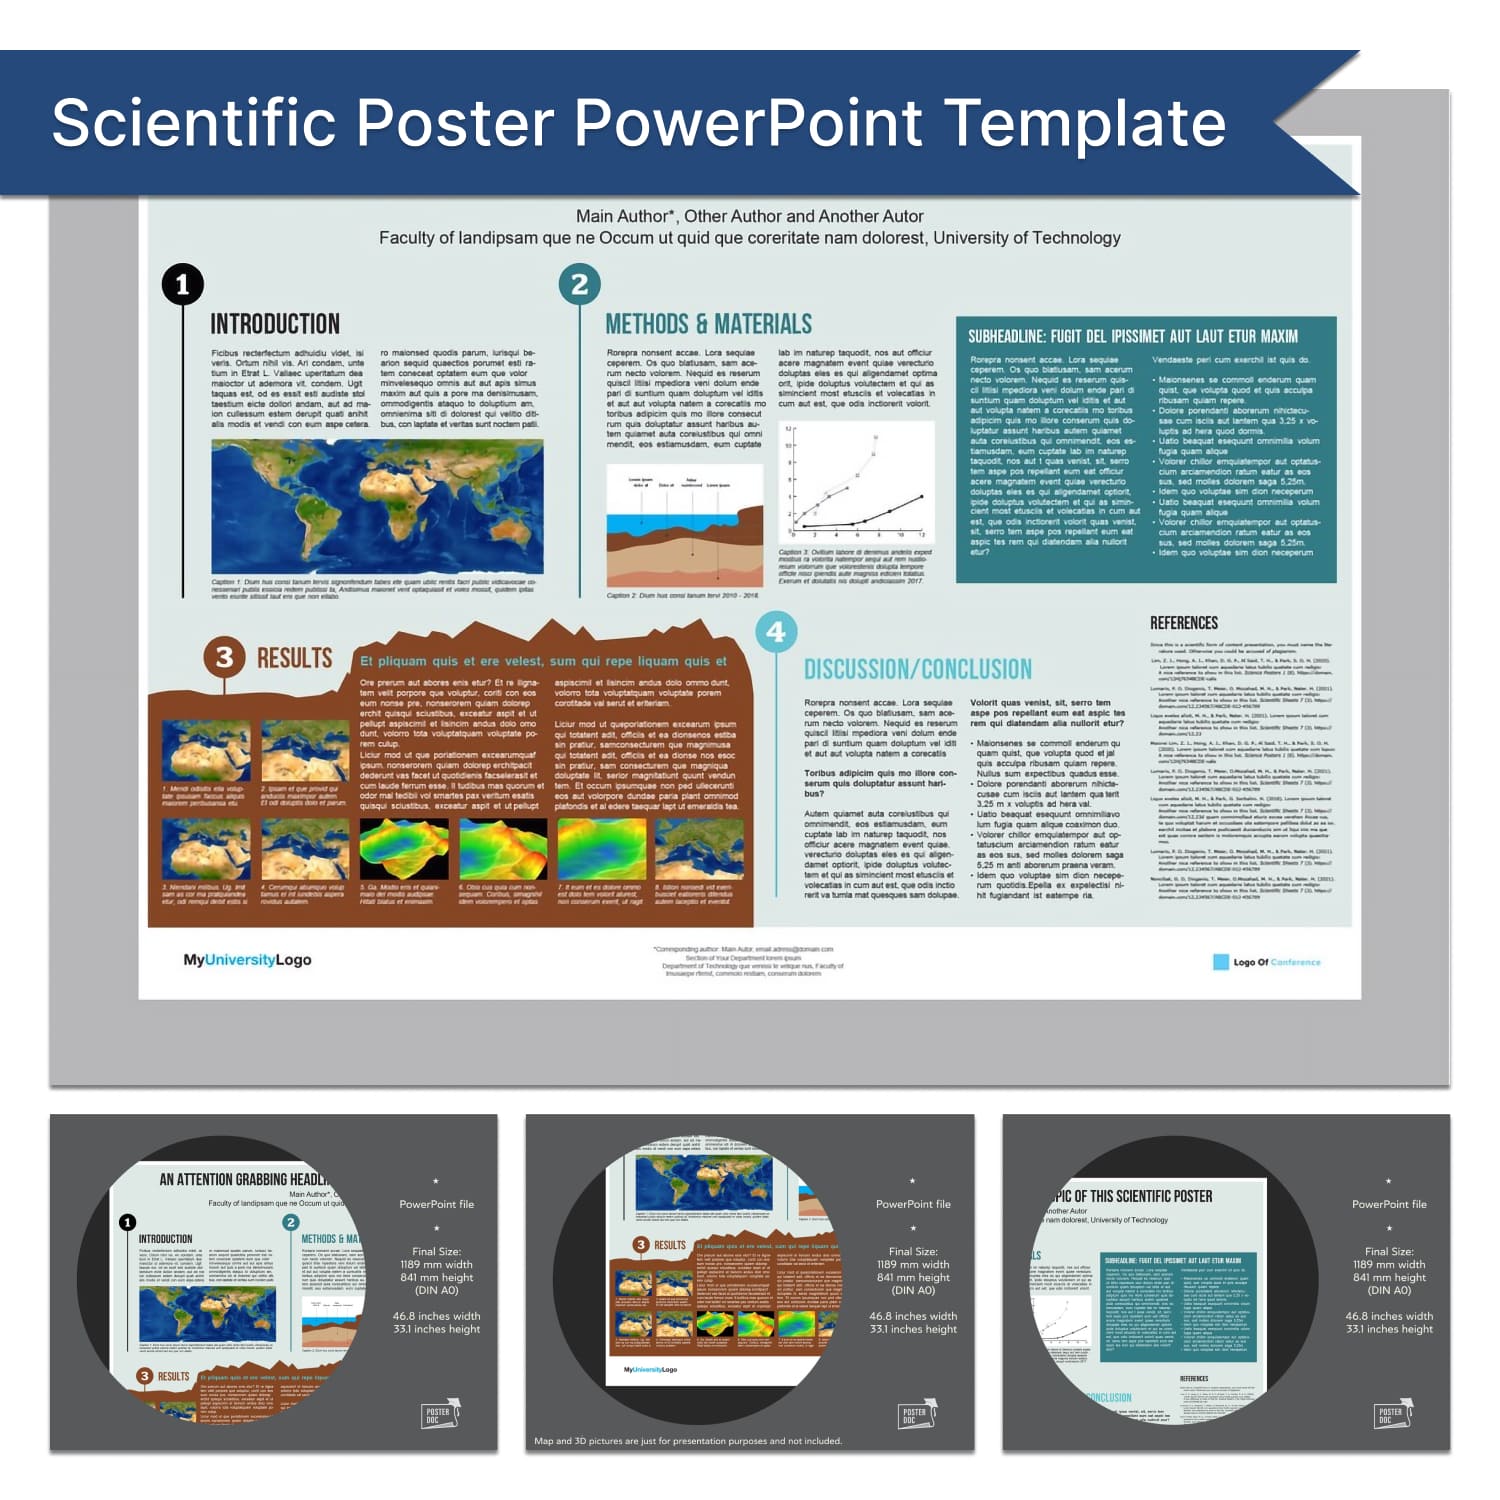 Science Poster PowerPoint Template.